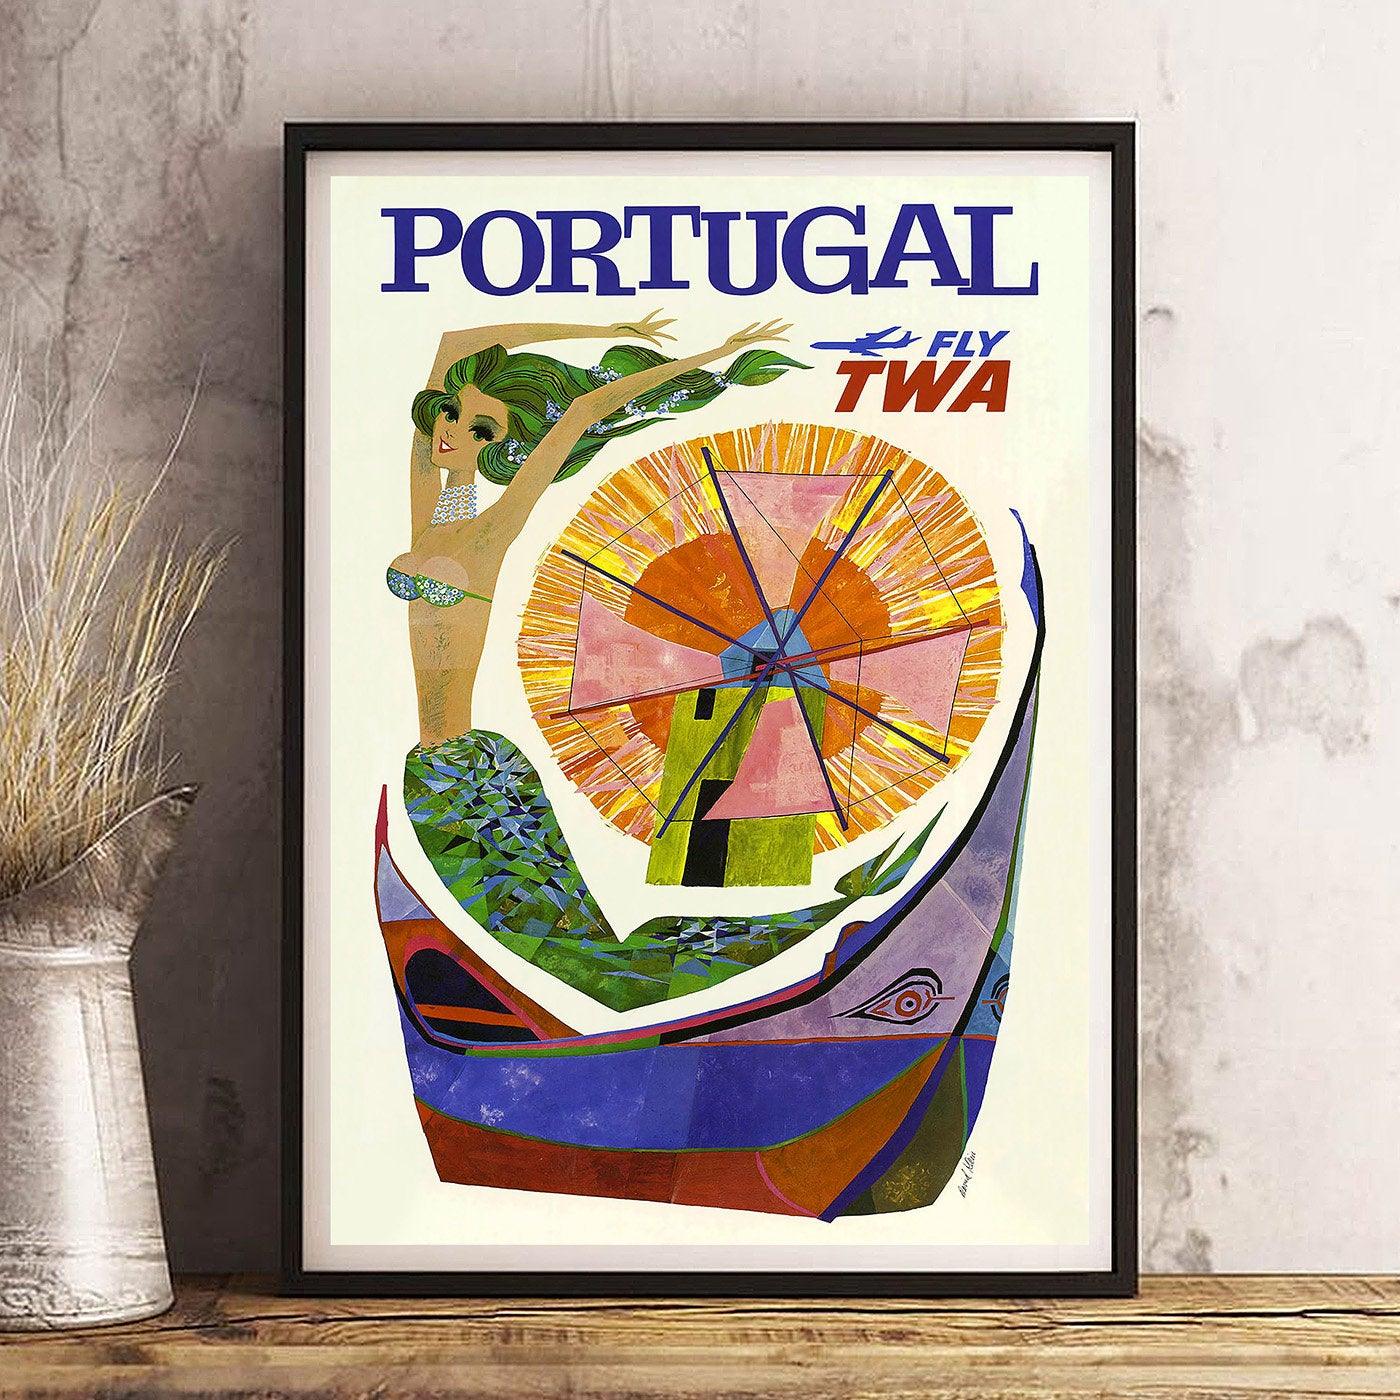 PORTUGAL - Vintage Travel Poster - Classic Posters